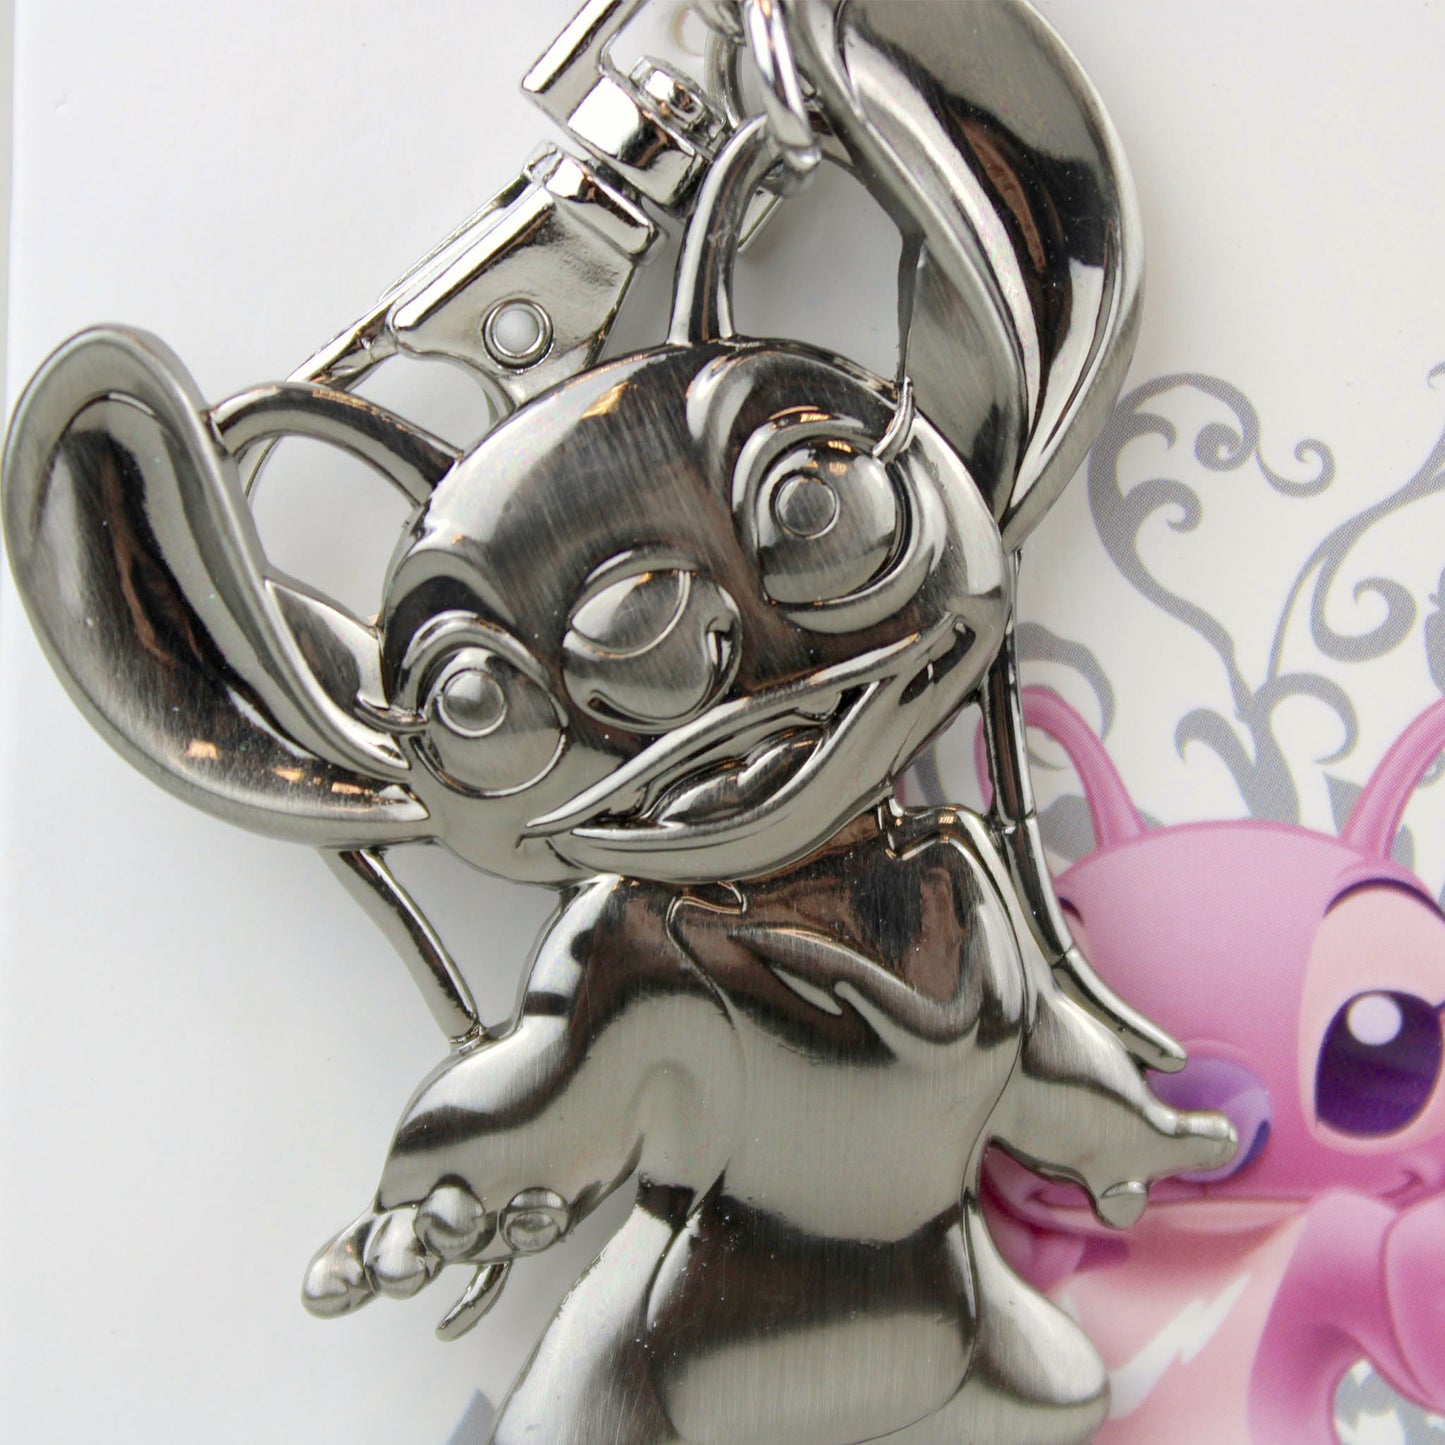 Angel (Lilo & Stitch) Disney Large Pewter Keychain – Collector's